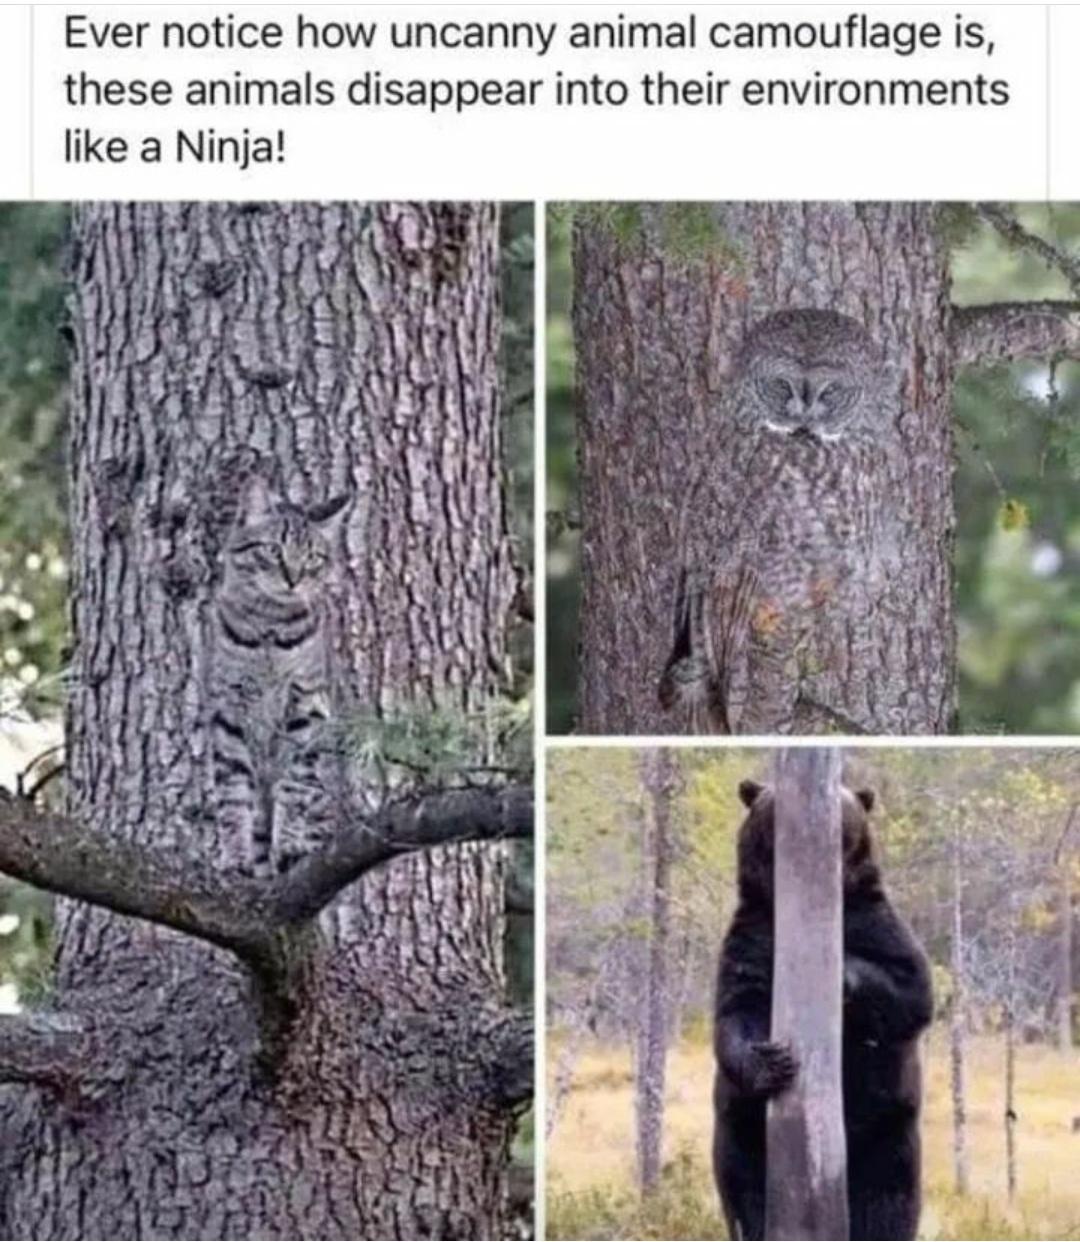 funny memes - hilarious memes - ever notice how impressive animals camouflage looks - Ever notice how uncanny animal camouflage is, these animals disappear into their environments a Ninja!